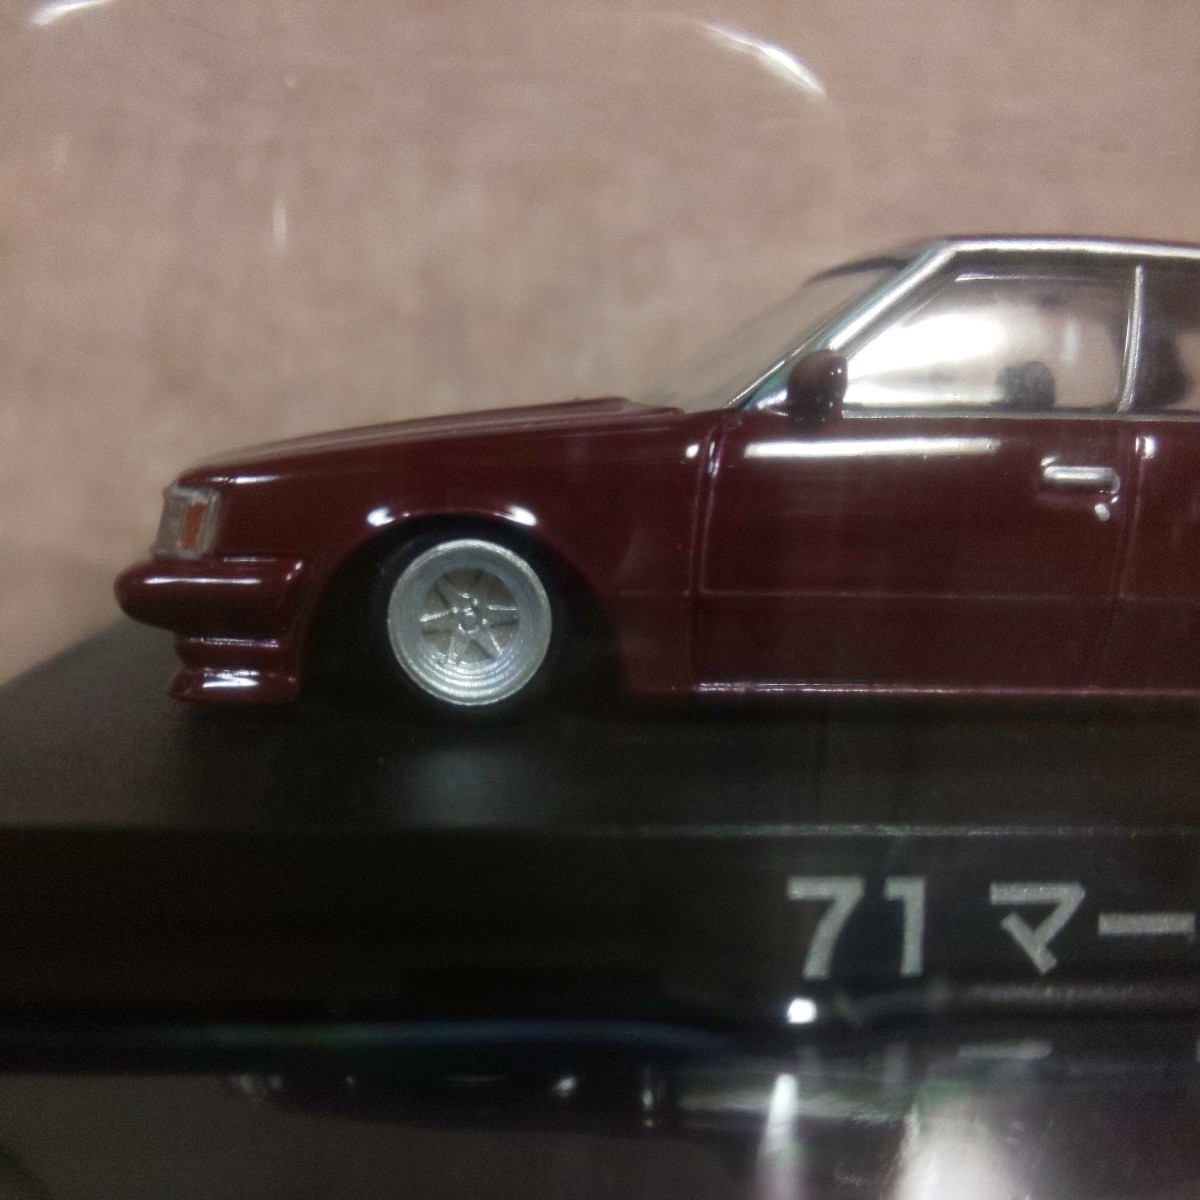 GX71 Aoshima 1/64gla tea n no. 12.71 Mark Ⅱ 1987 year ② tea color Long Champ manner Brown old car association high speed have lead latter term type 